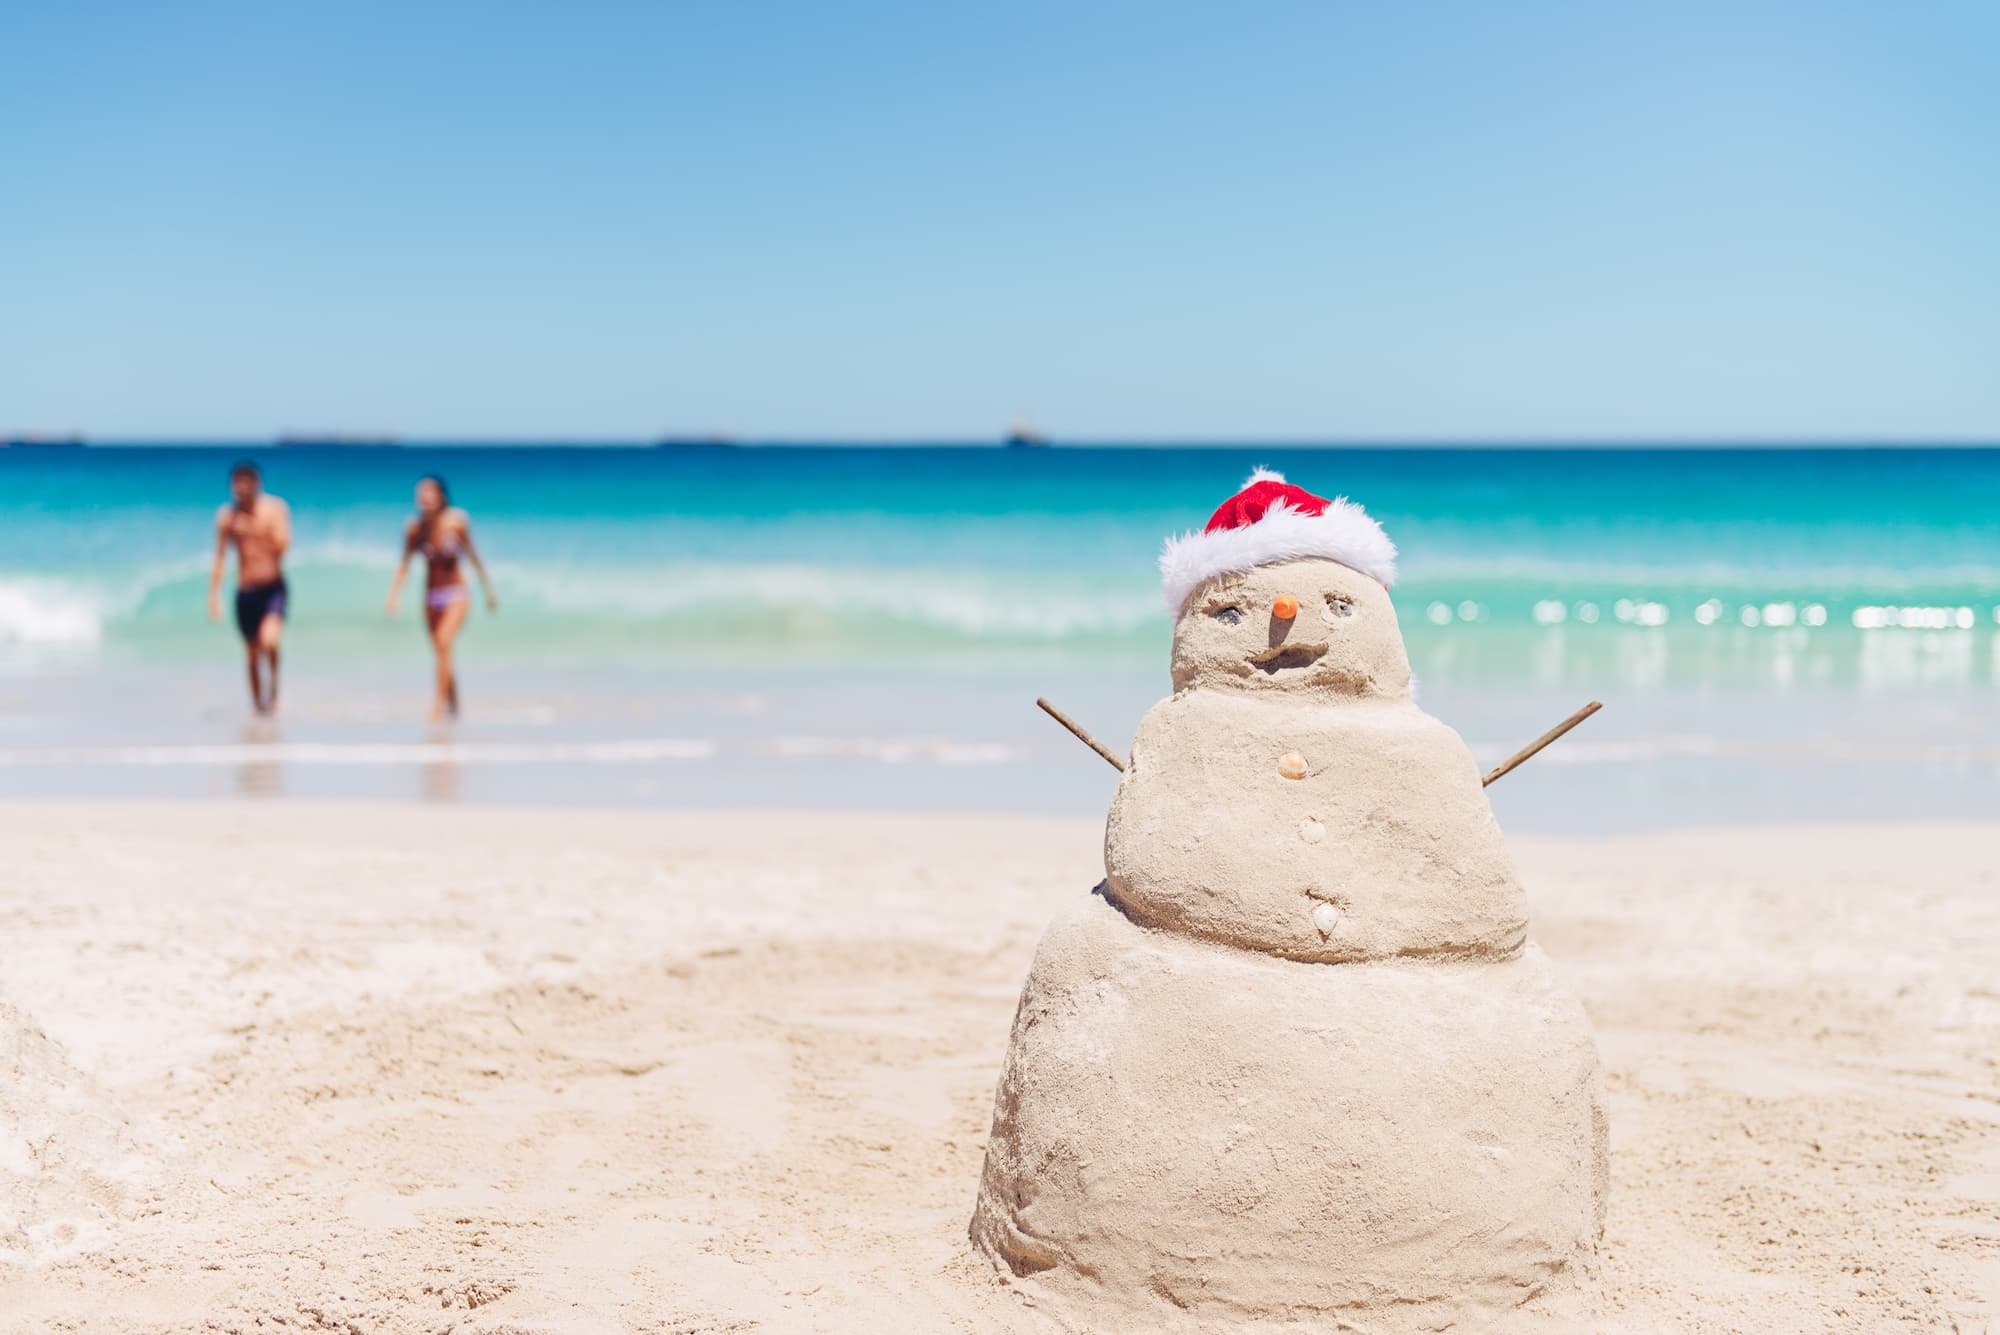 Large Smiling Sand Snowman At The Beach In Australia On Christmas Day